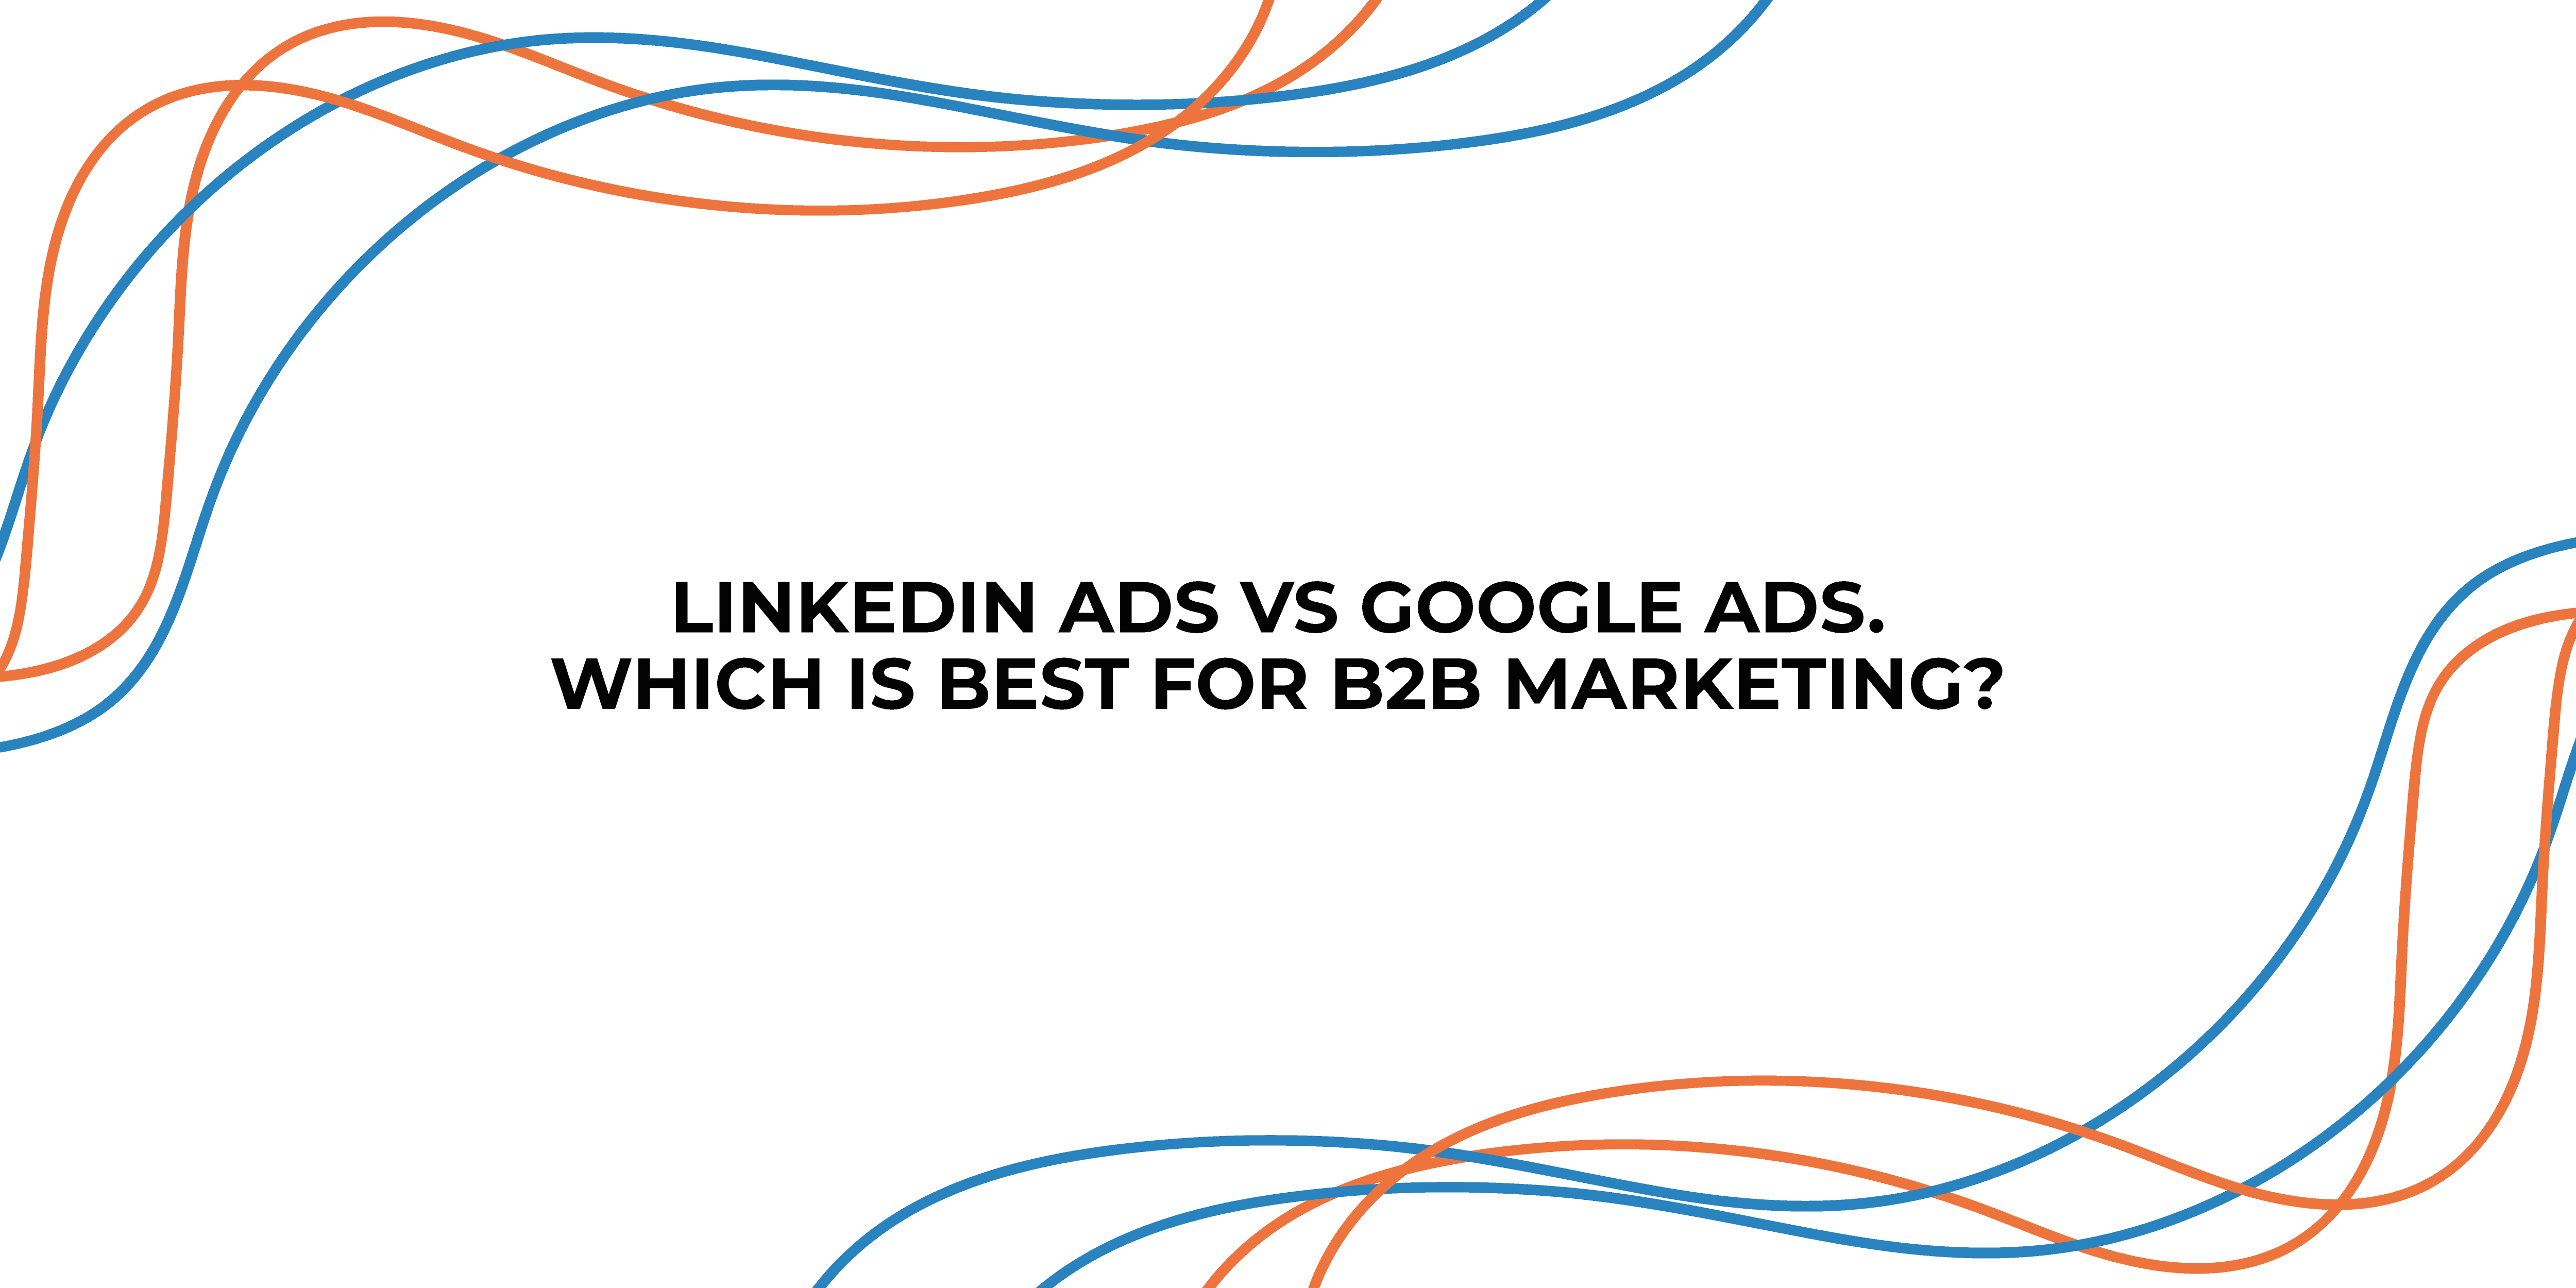 LinkedIn Ads vs Google Ads: Which Is Best For B2B Marketing?